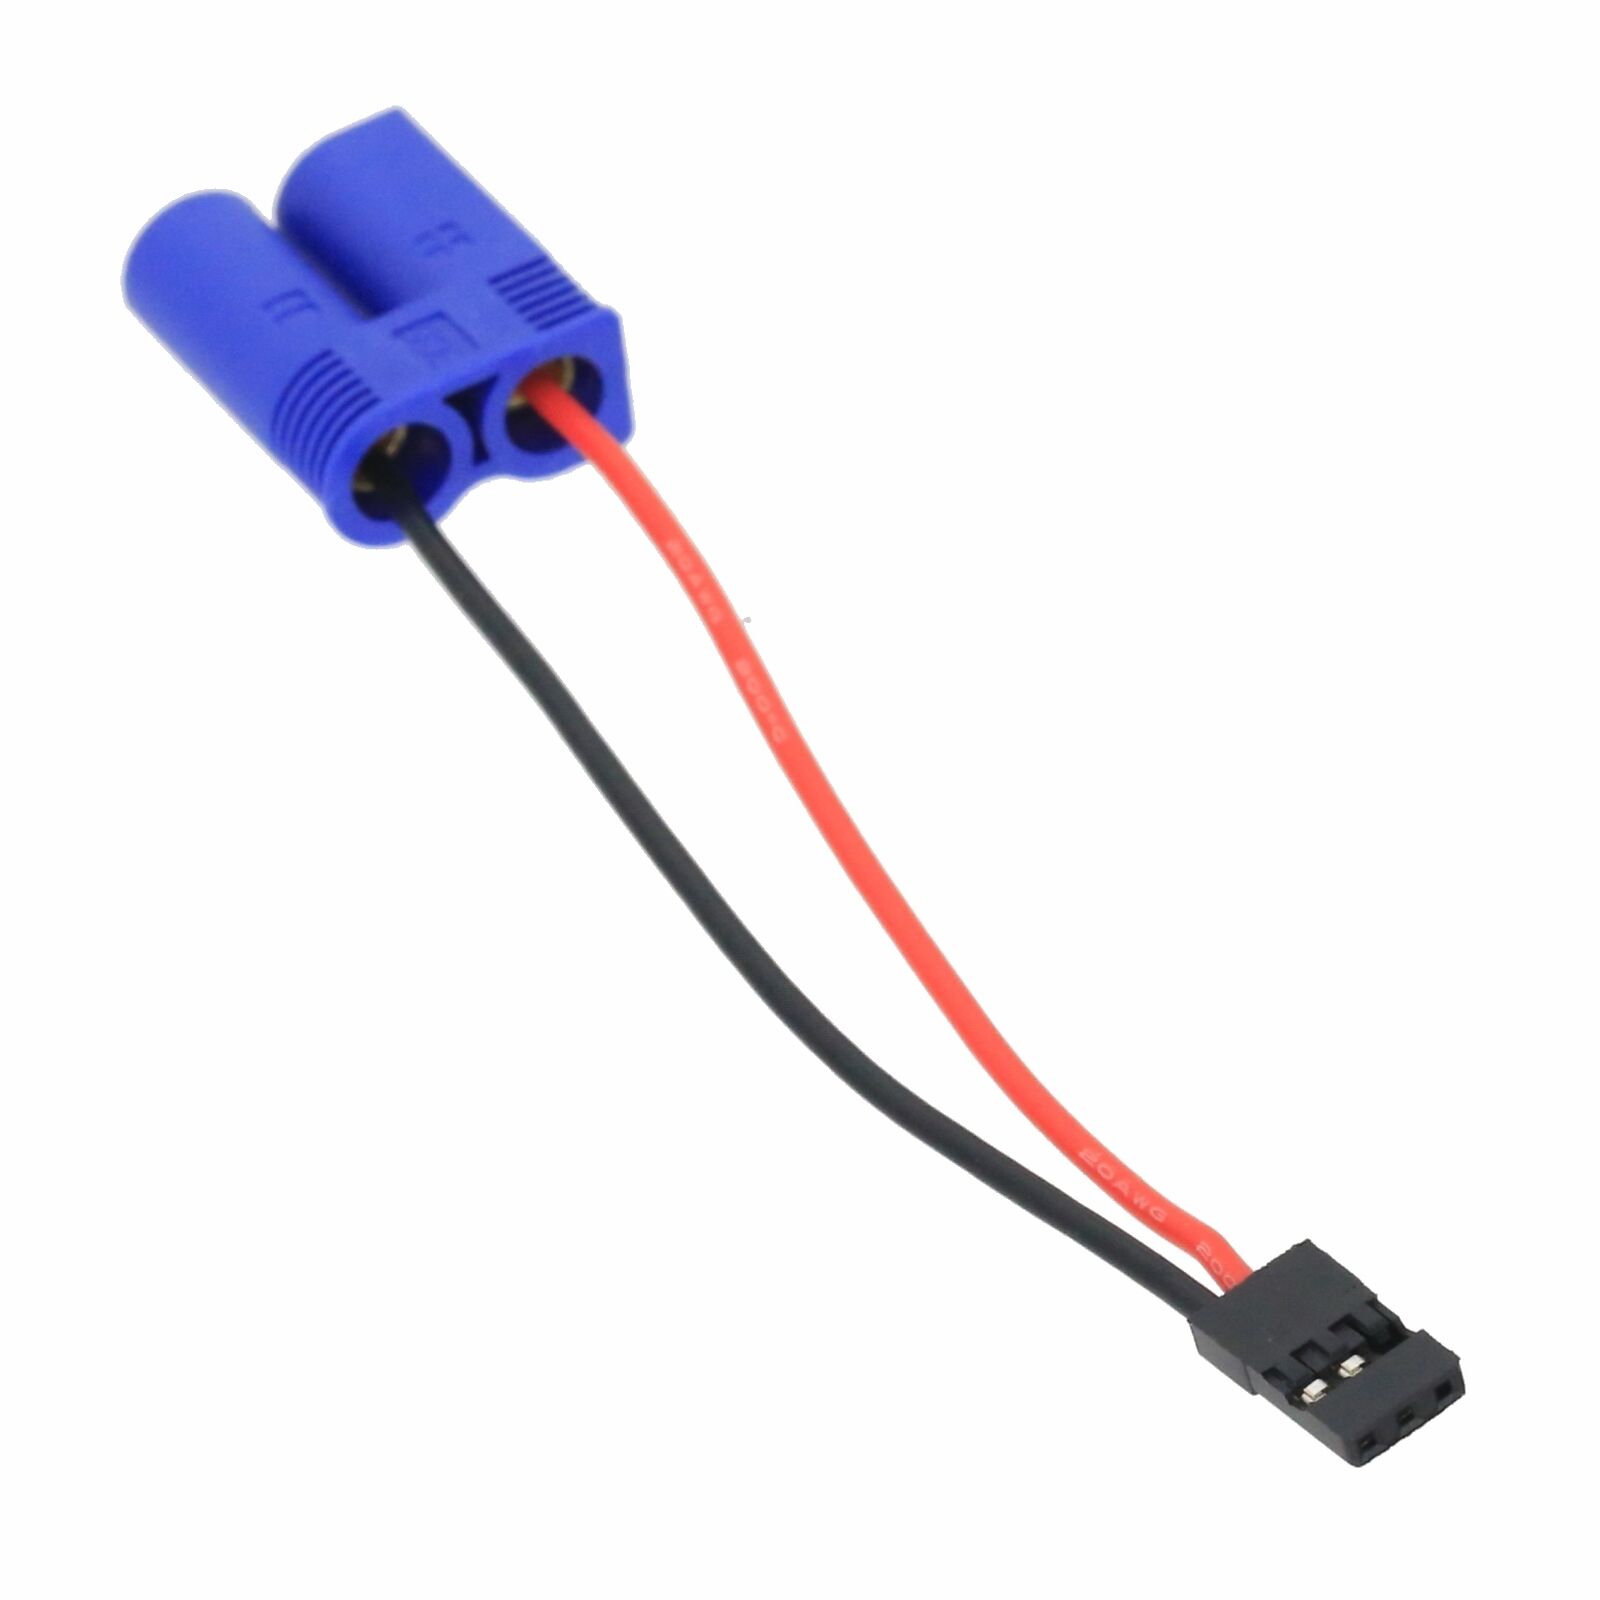 EC5 Male to JR Futaba Male Adapter 20awg 10cm Wire for RC Model 